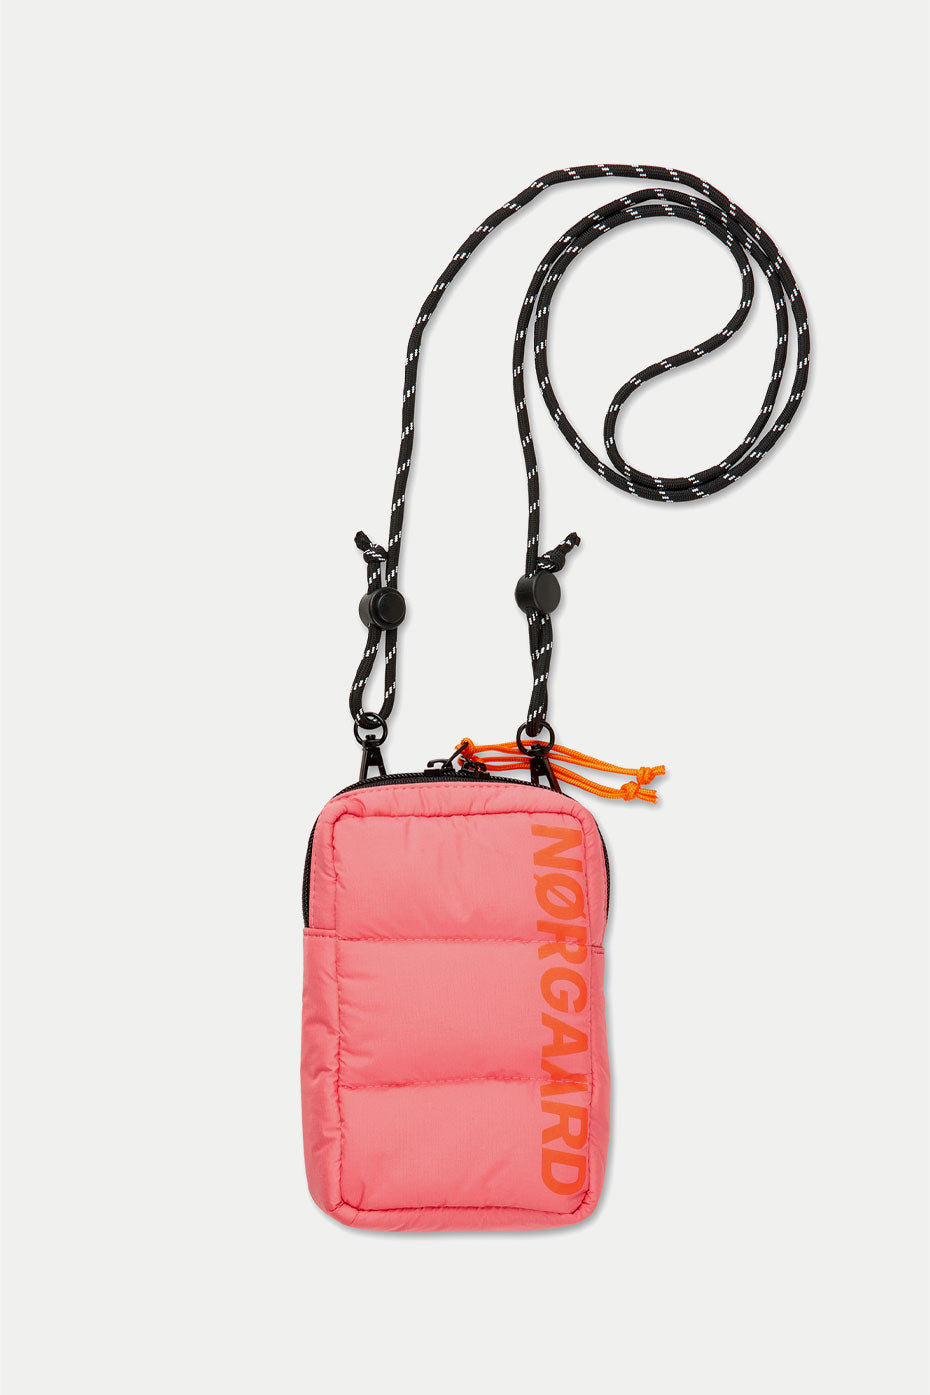 Mads Norgaard Shell Pink Recycle Floss Bag